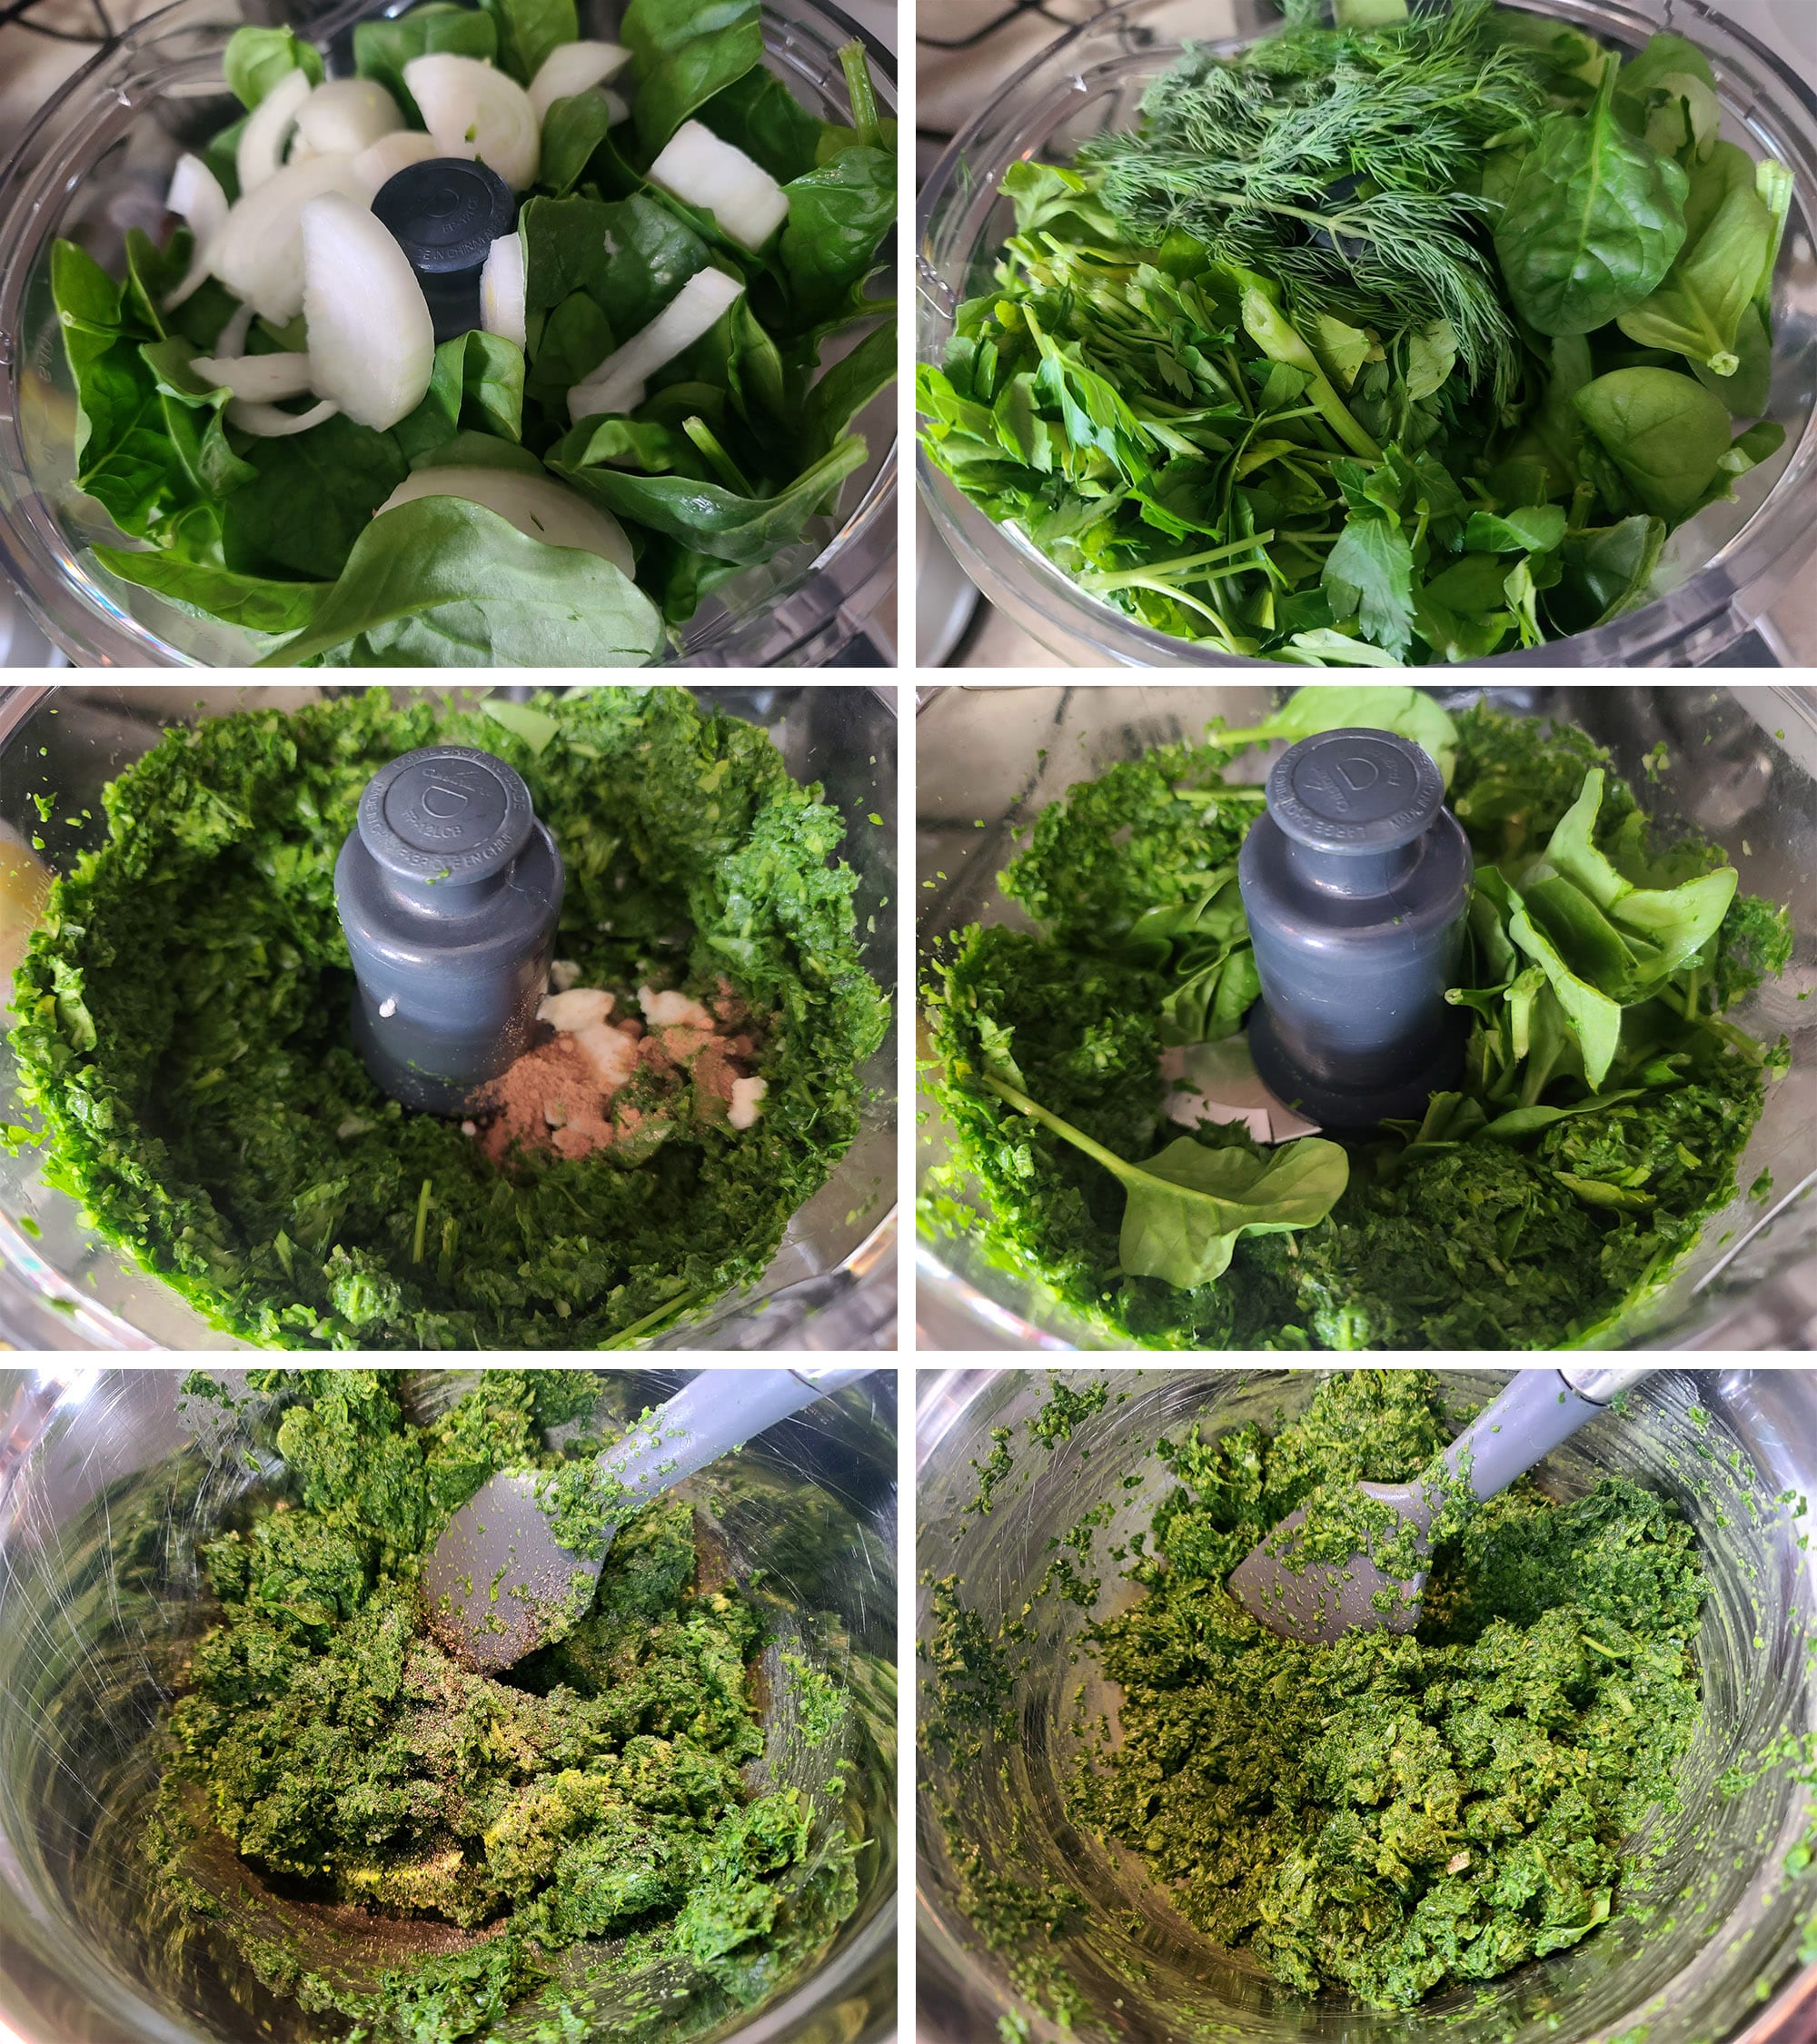 A 5 part image showing the spanakopita spinach pesto mixture being made.